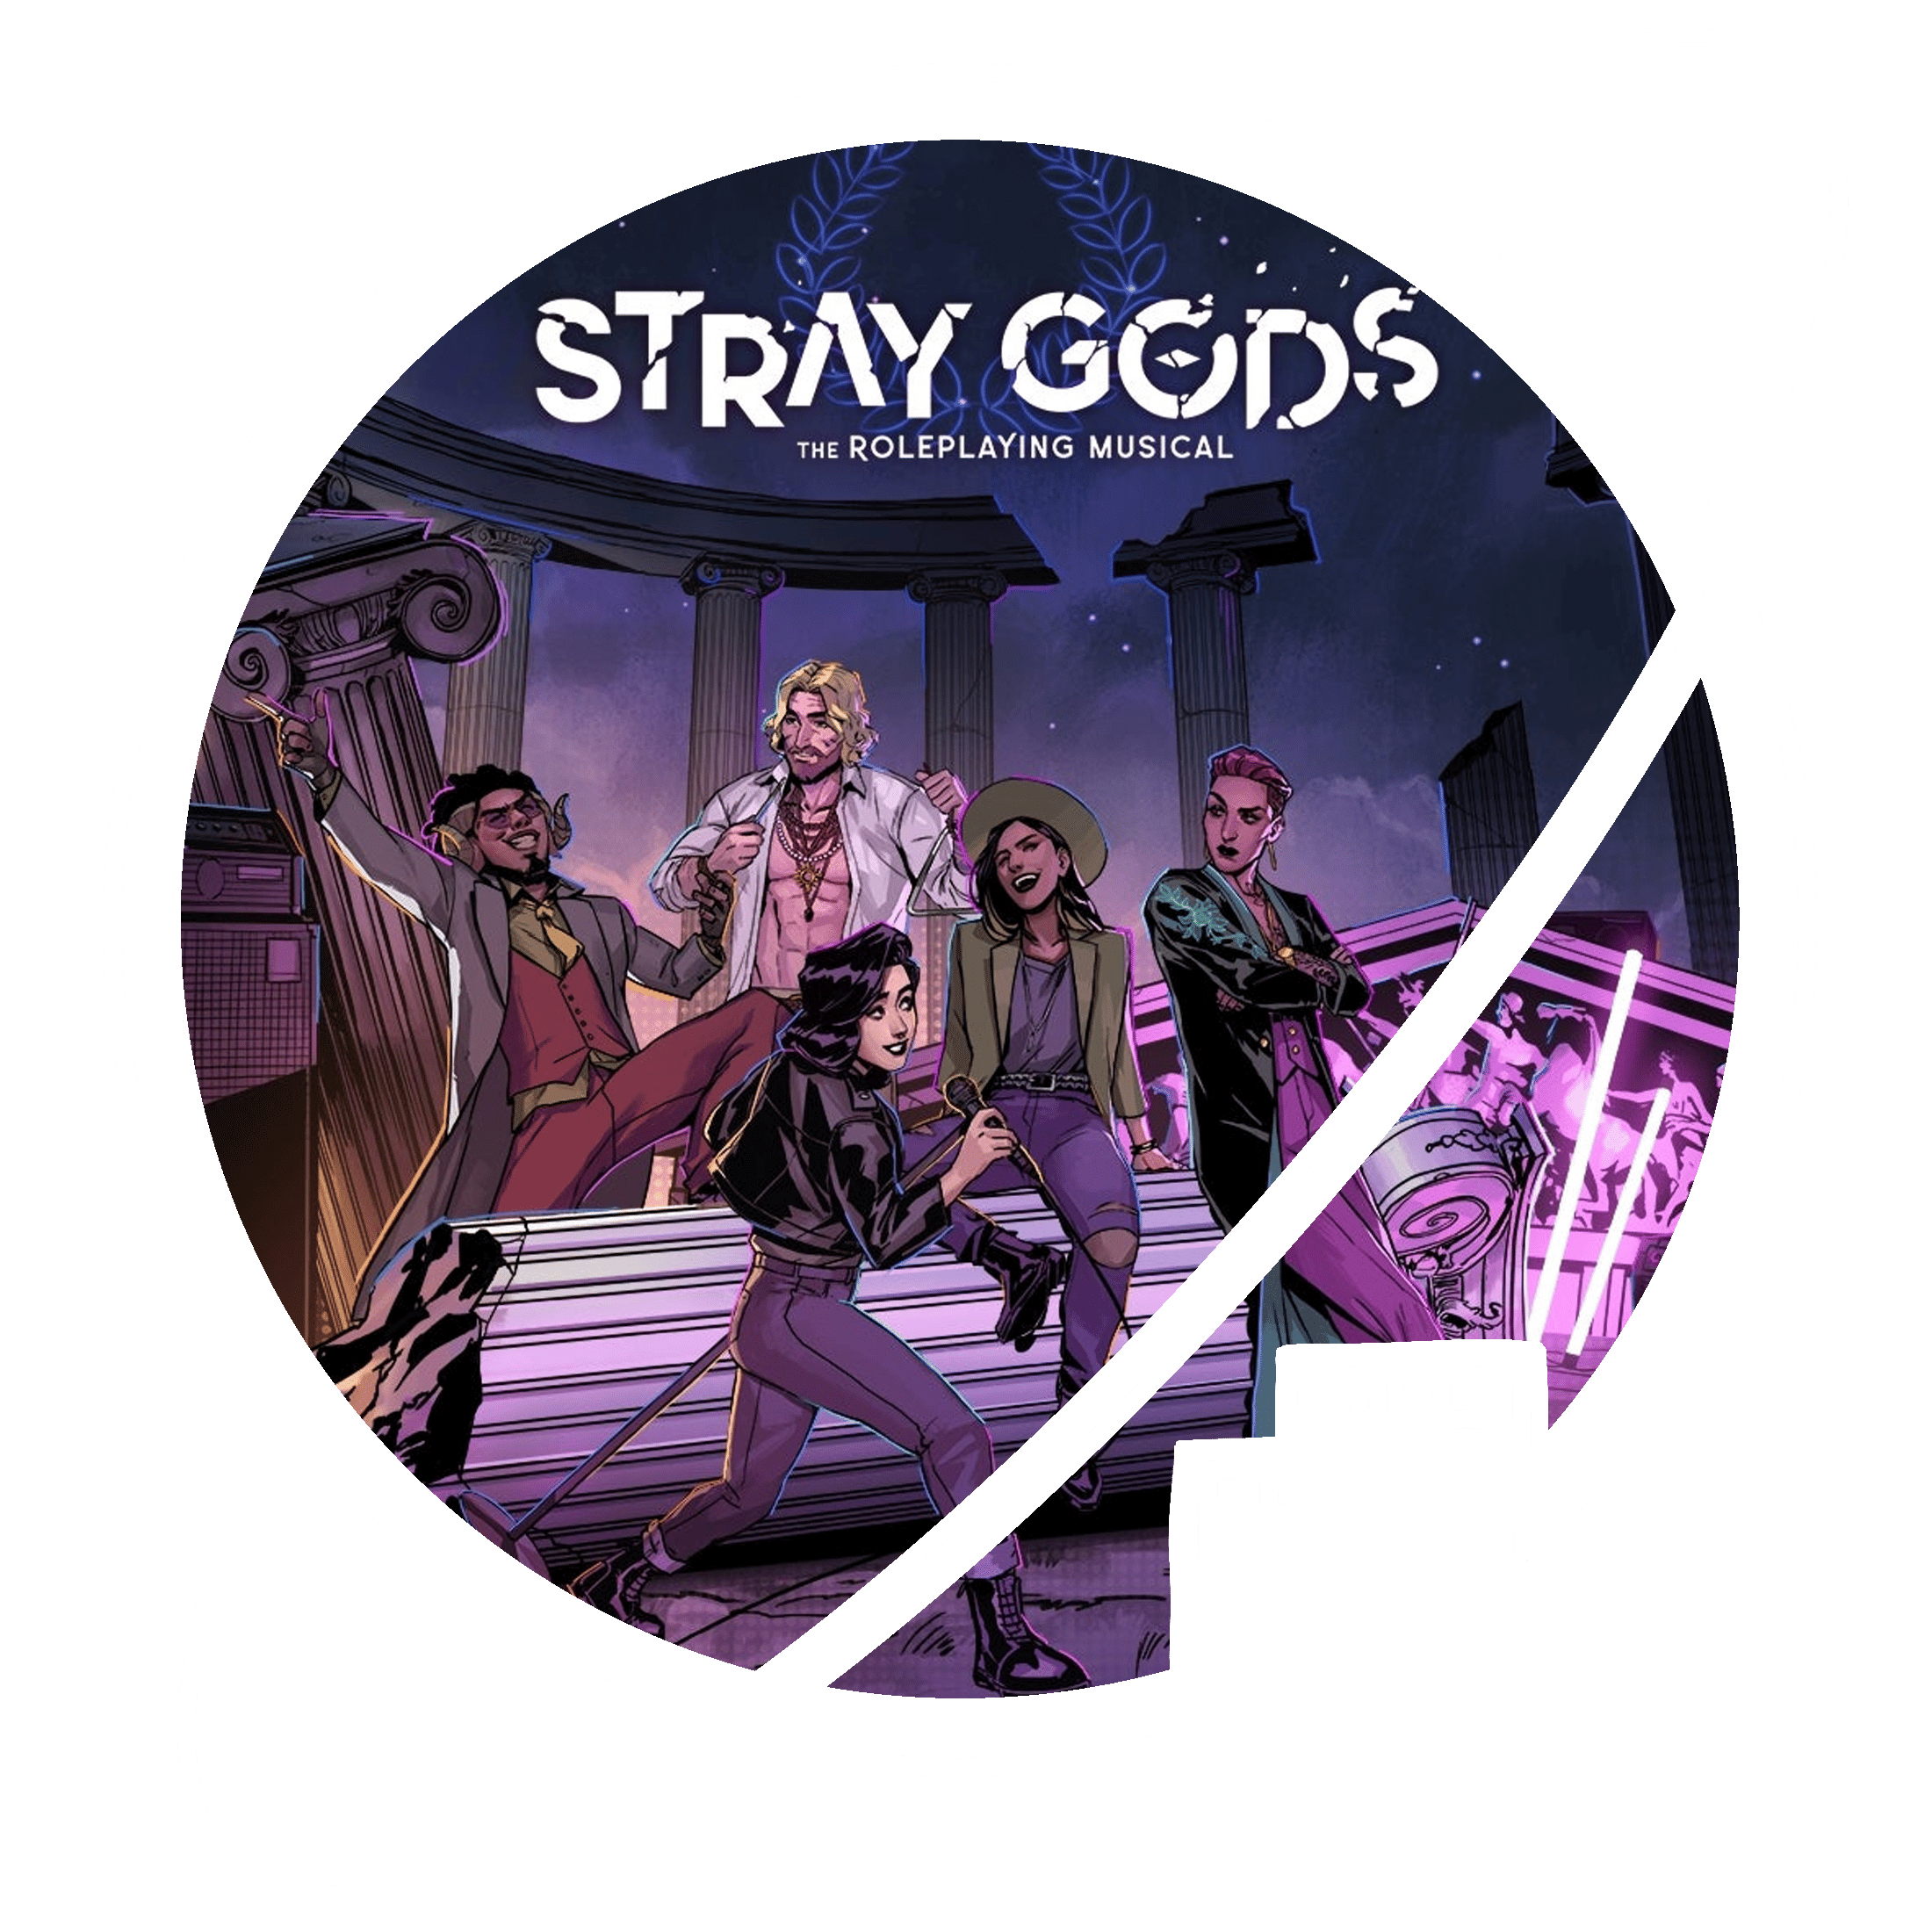 Stray Gods - Humble Games, gods game epic the musical 